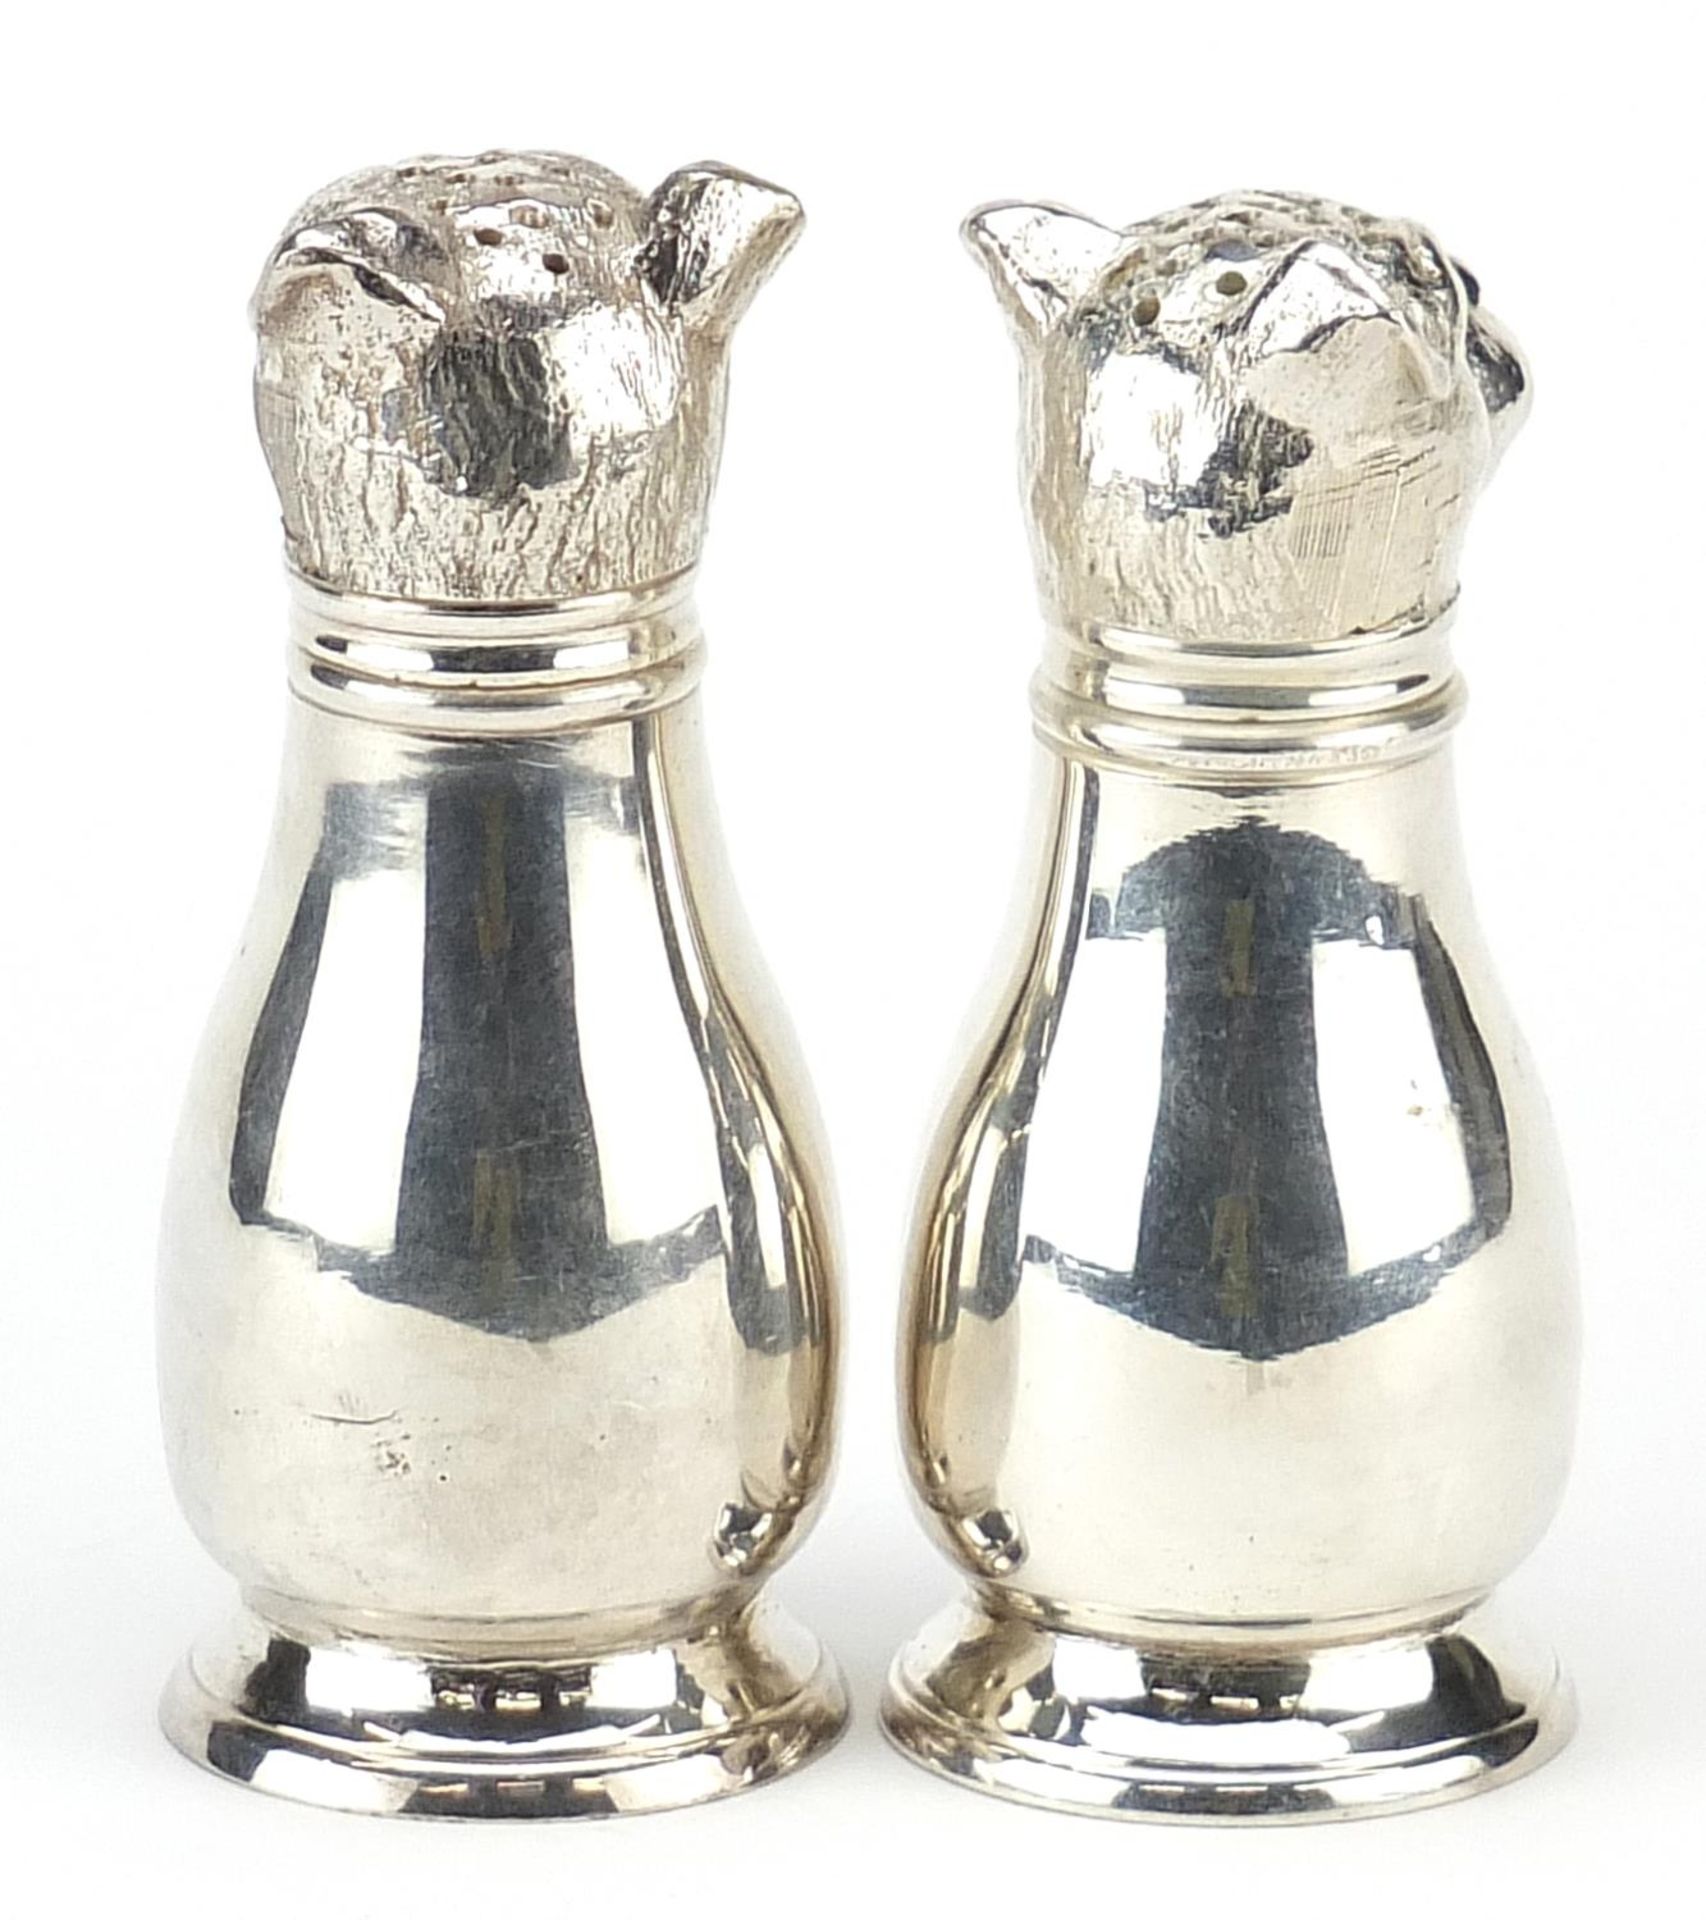 Pair of novelty silver plated casters in the form of French Bulldogs, 10.5cm high Appears to be in - Image 2 of 3